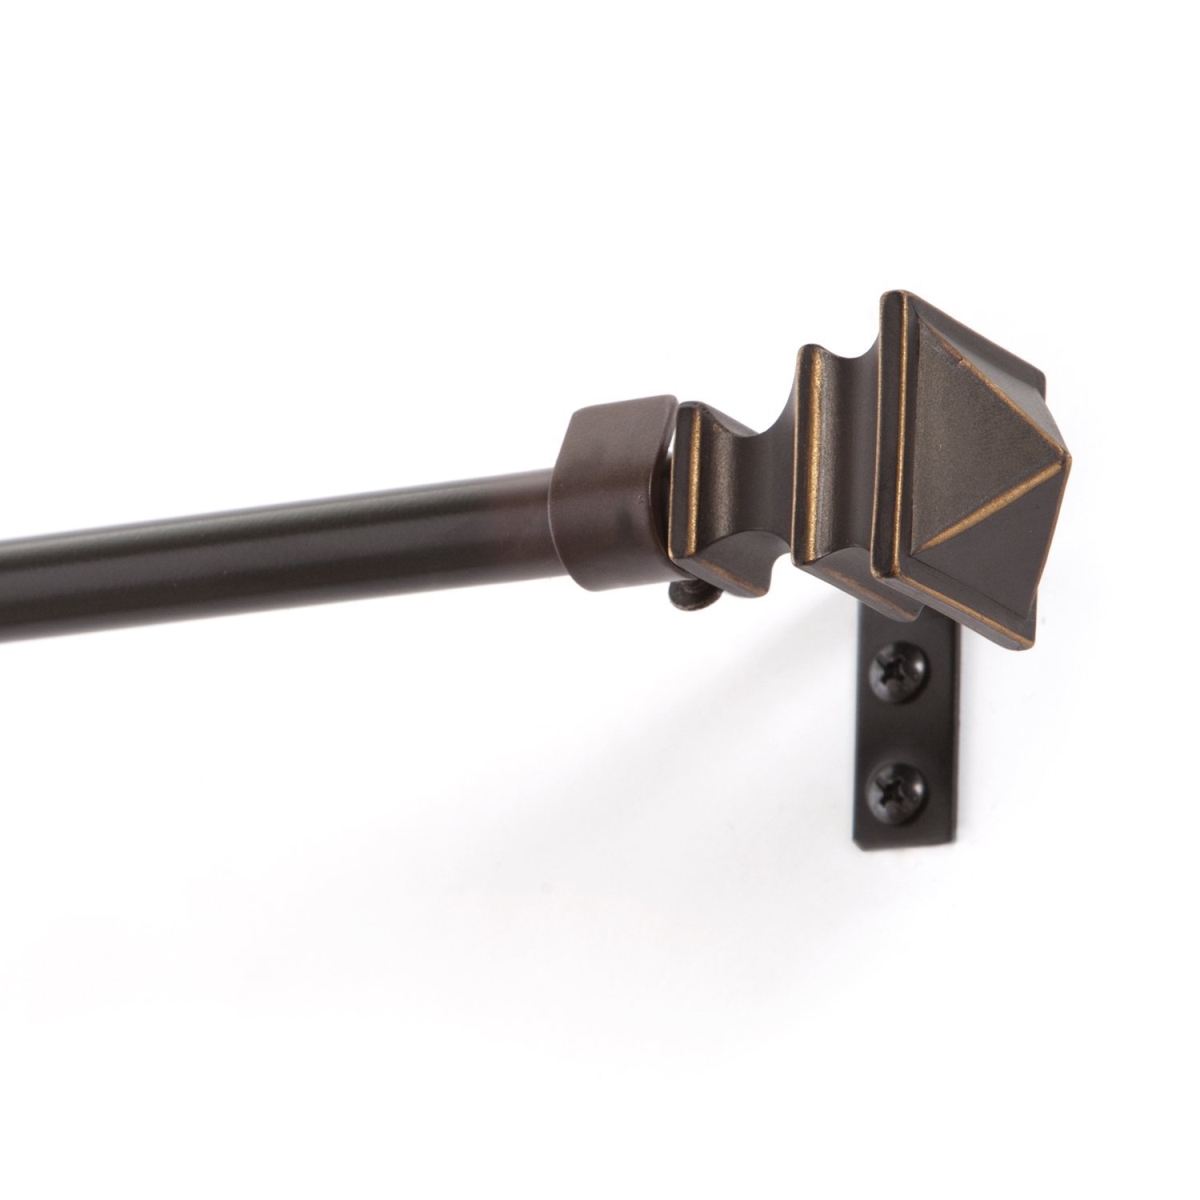 32-lwf1017-1orb 28-48 In. Painted Oil Rubbed Bronze Finish Single Rod Window Hardware With Square Resin Finial No. 1